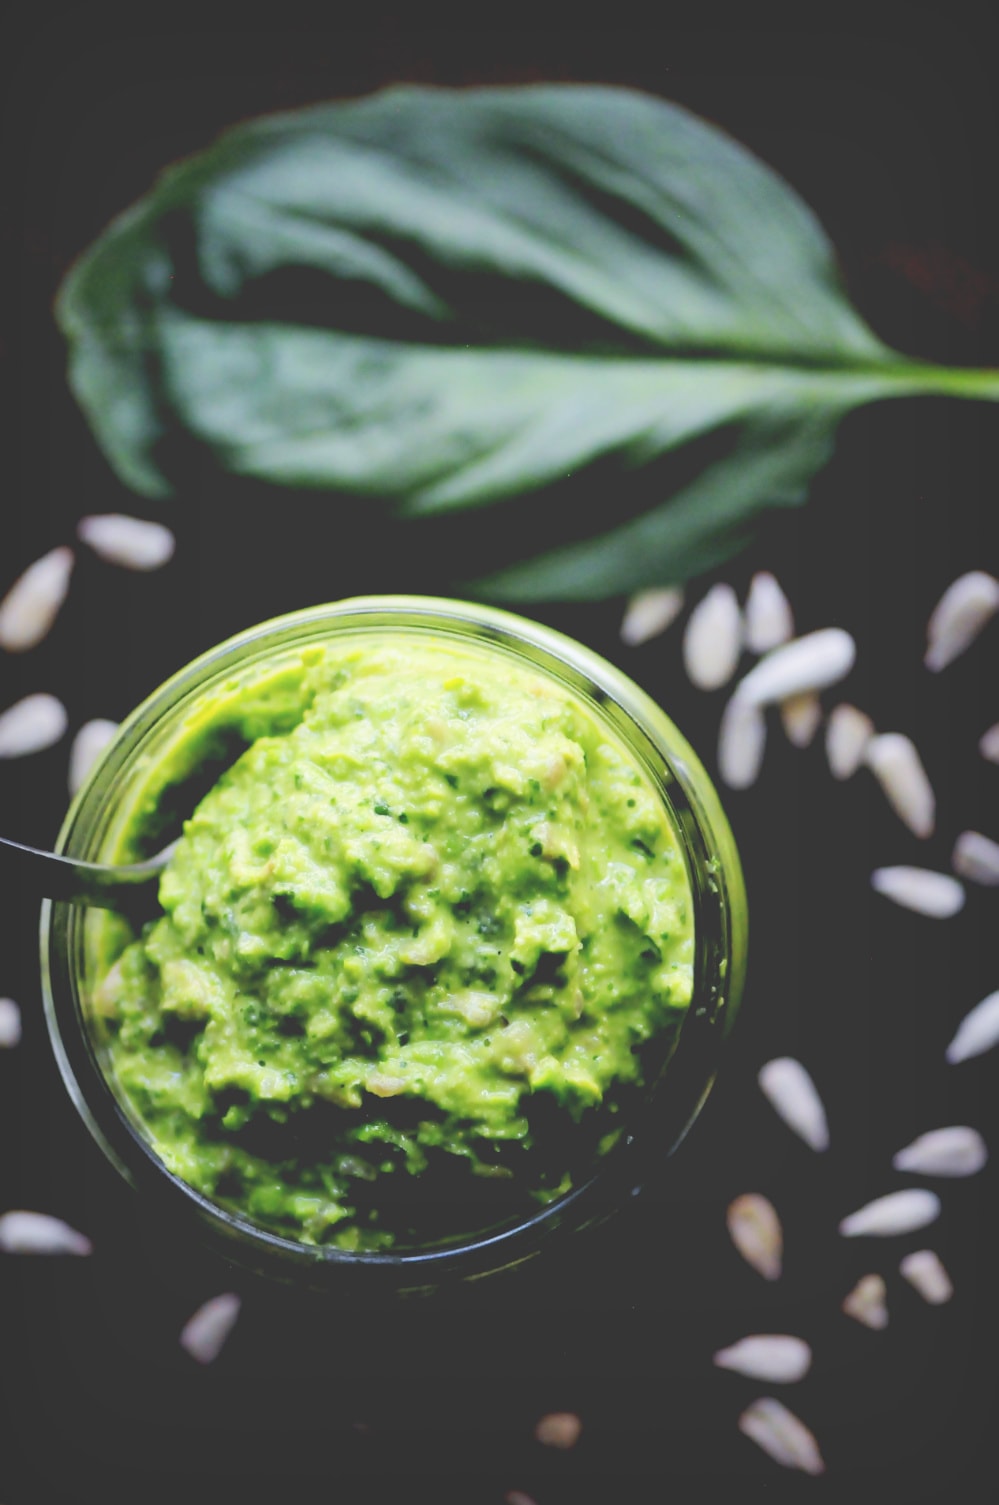  A gluten-free and vegan Sunny Spring Pea & Basil Pesto made with spring peas, fresh basil, mixed greens, sunflower seeds, garlic, and lemon juice. This delicious pesto is easy, healthy, and DELICIOUS! #veganpesto #springpesto #peapesto #basilpesto #sunflowerseedpesto 